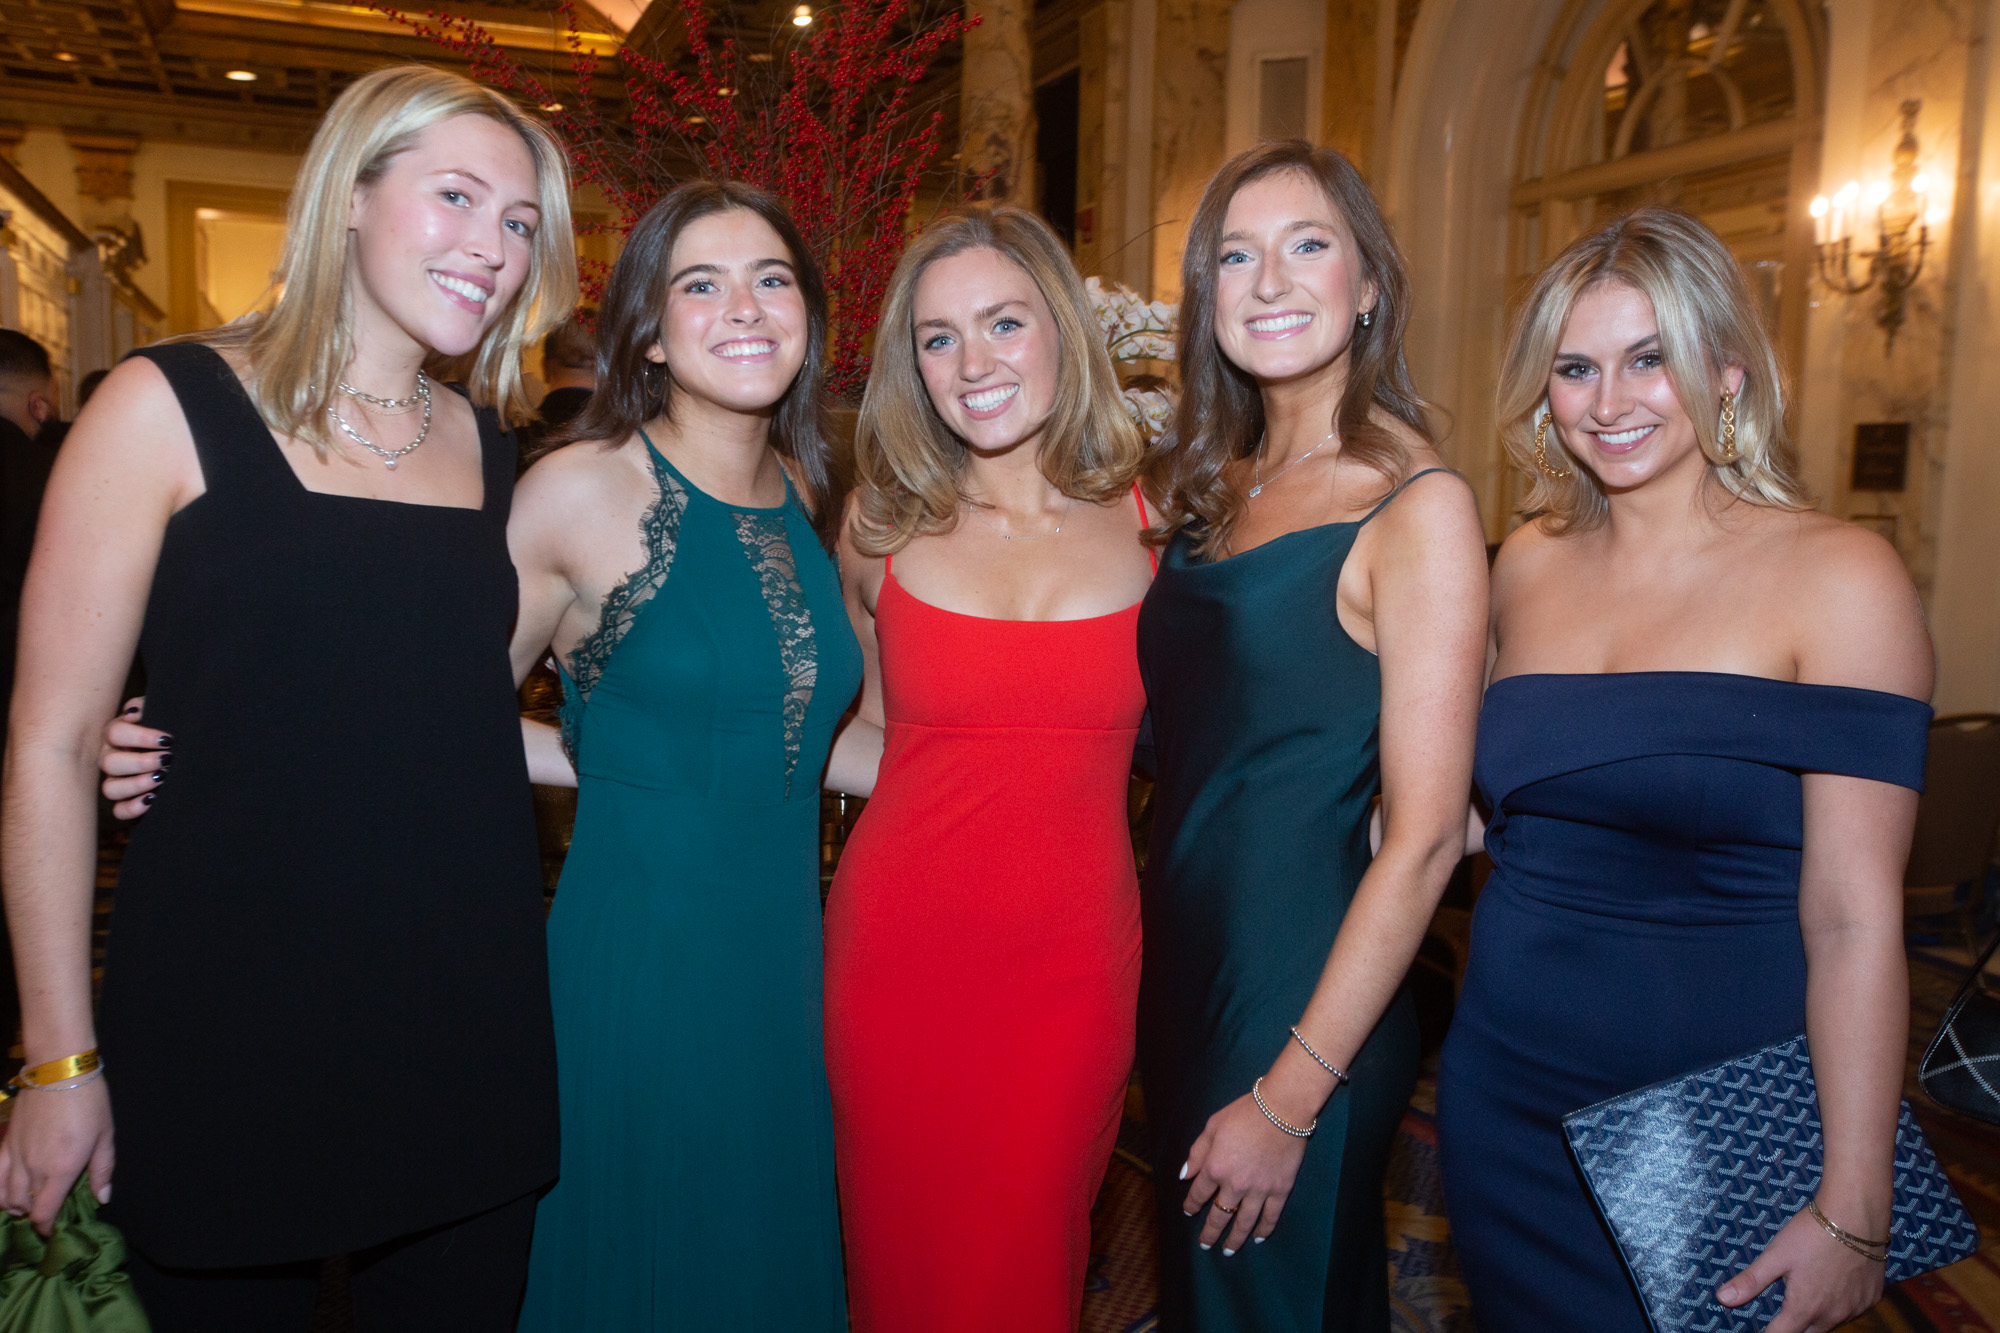 Griffin Foundation’s Winter Ball raises more than 2 million for